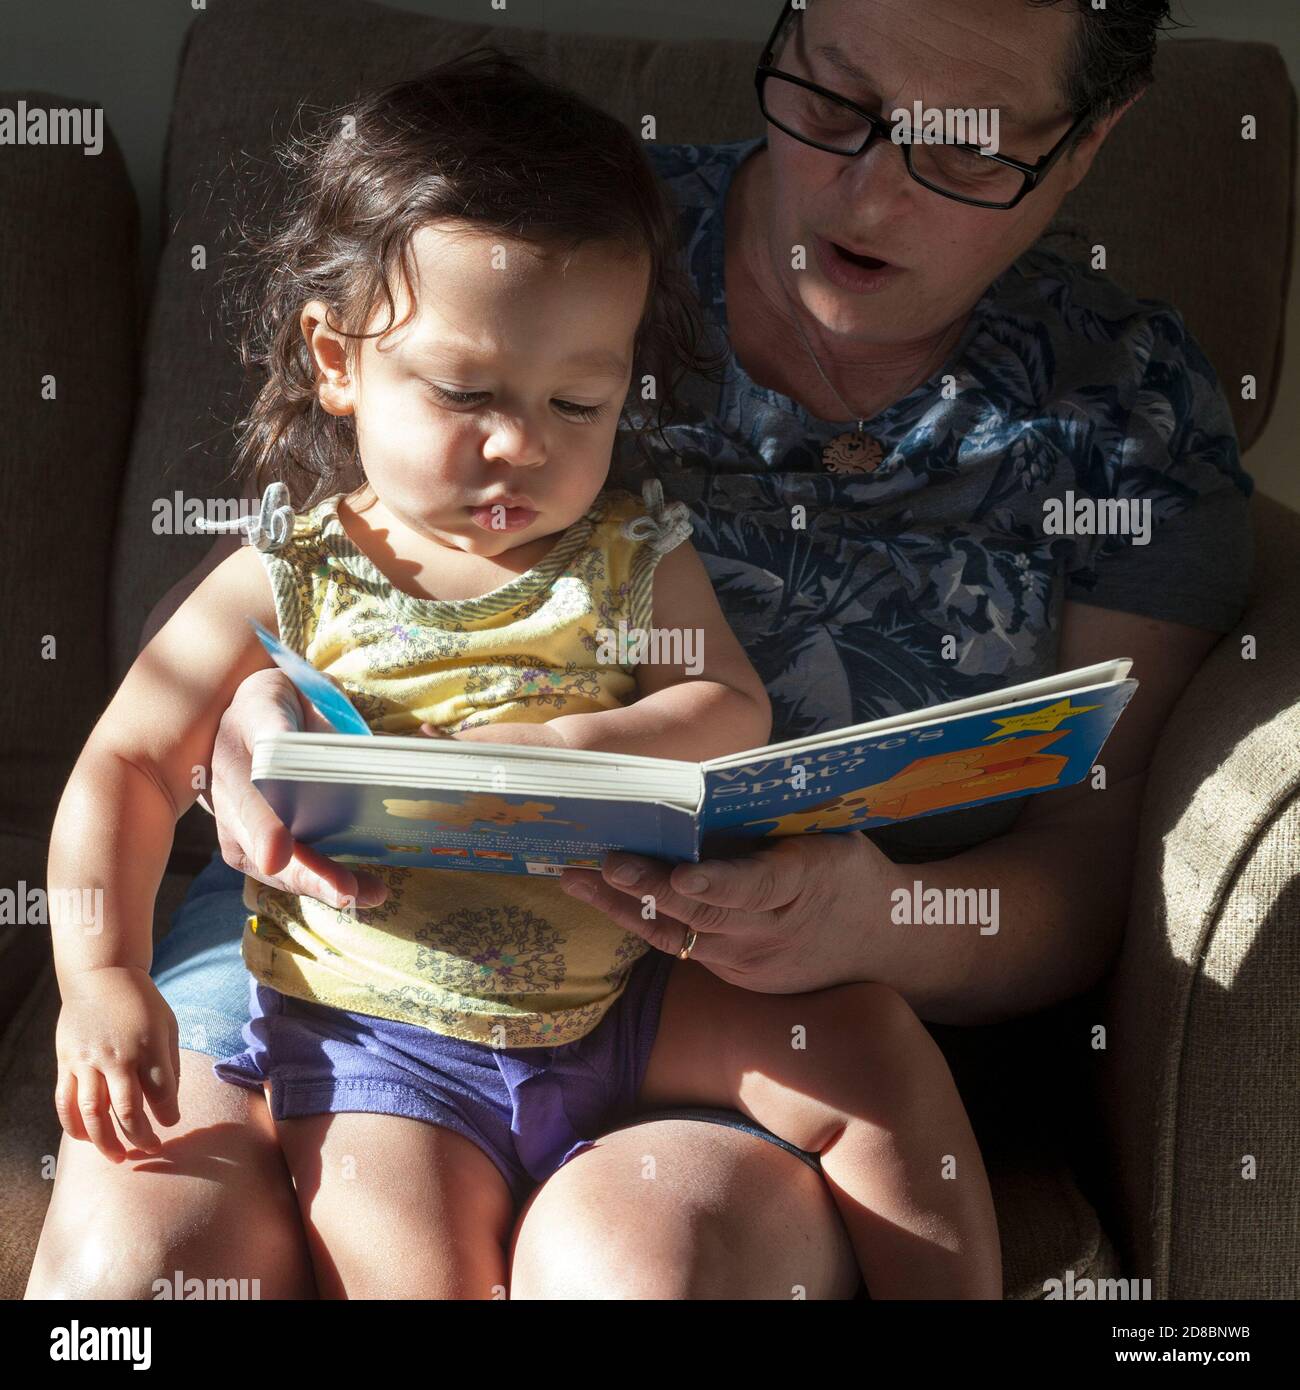 A one year old is read to by her grandmother. Stock Photo